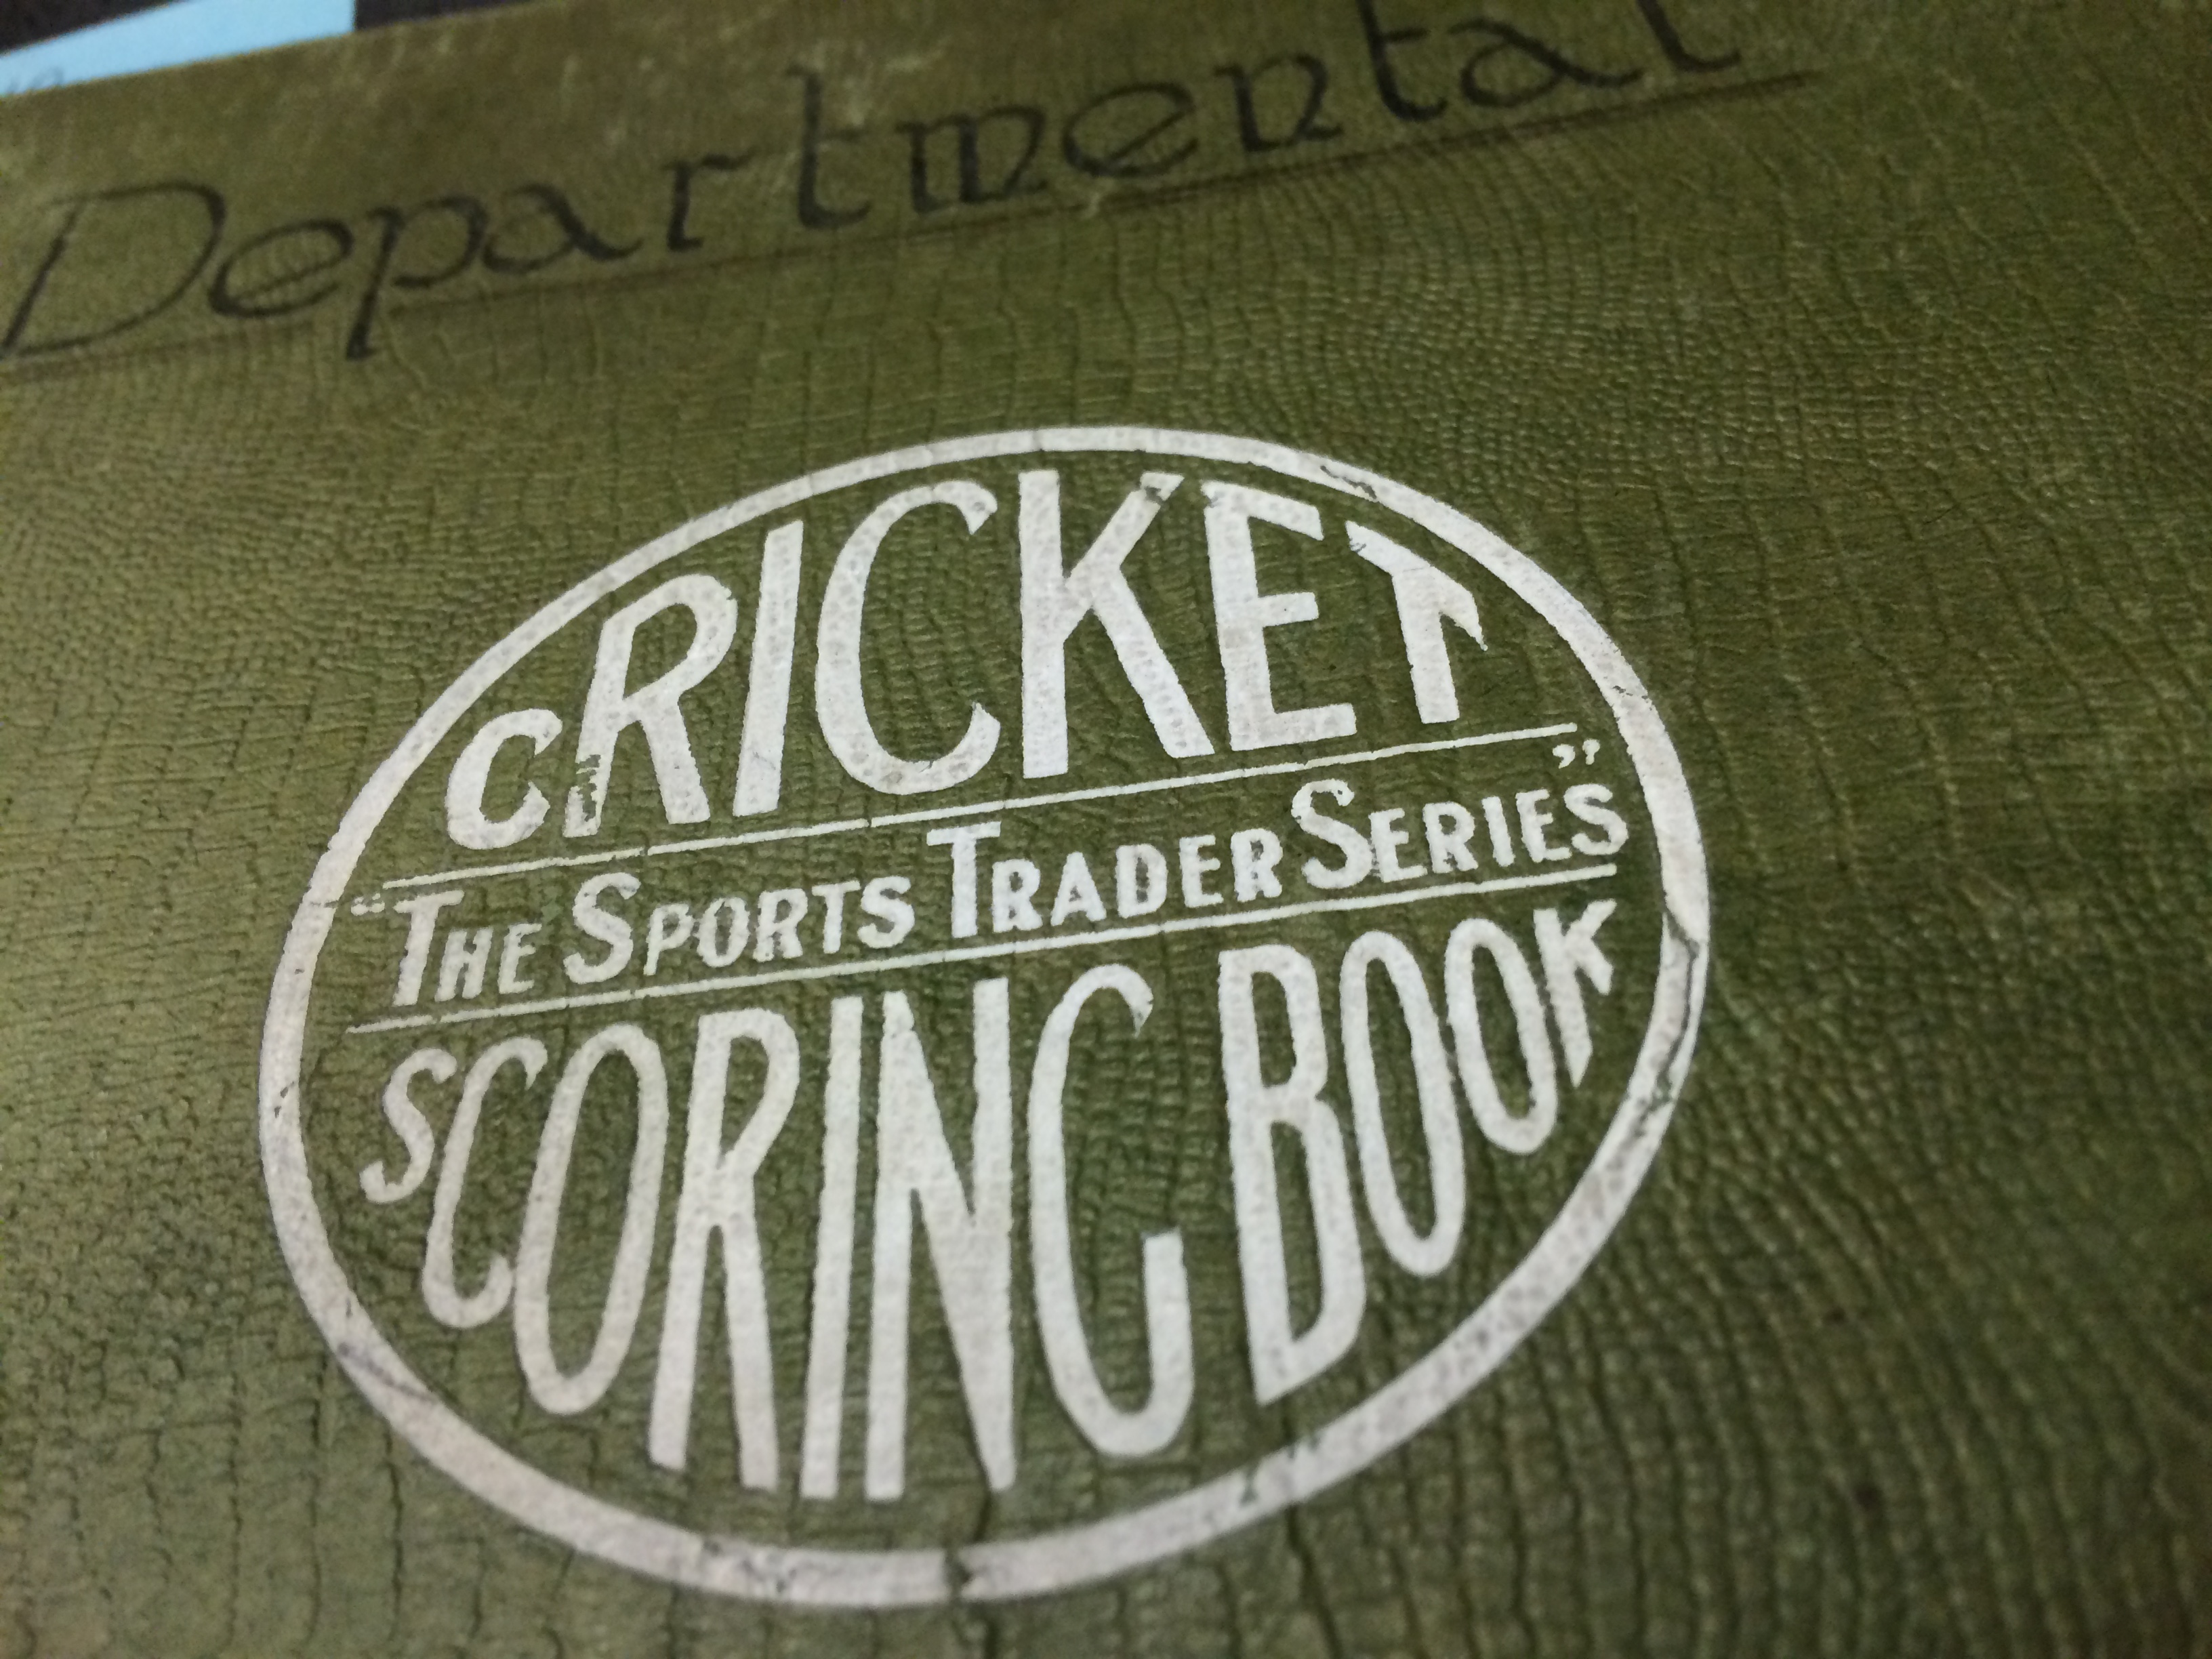 HP 610: The cover of one of the Cricket Scoring Books used by the firm